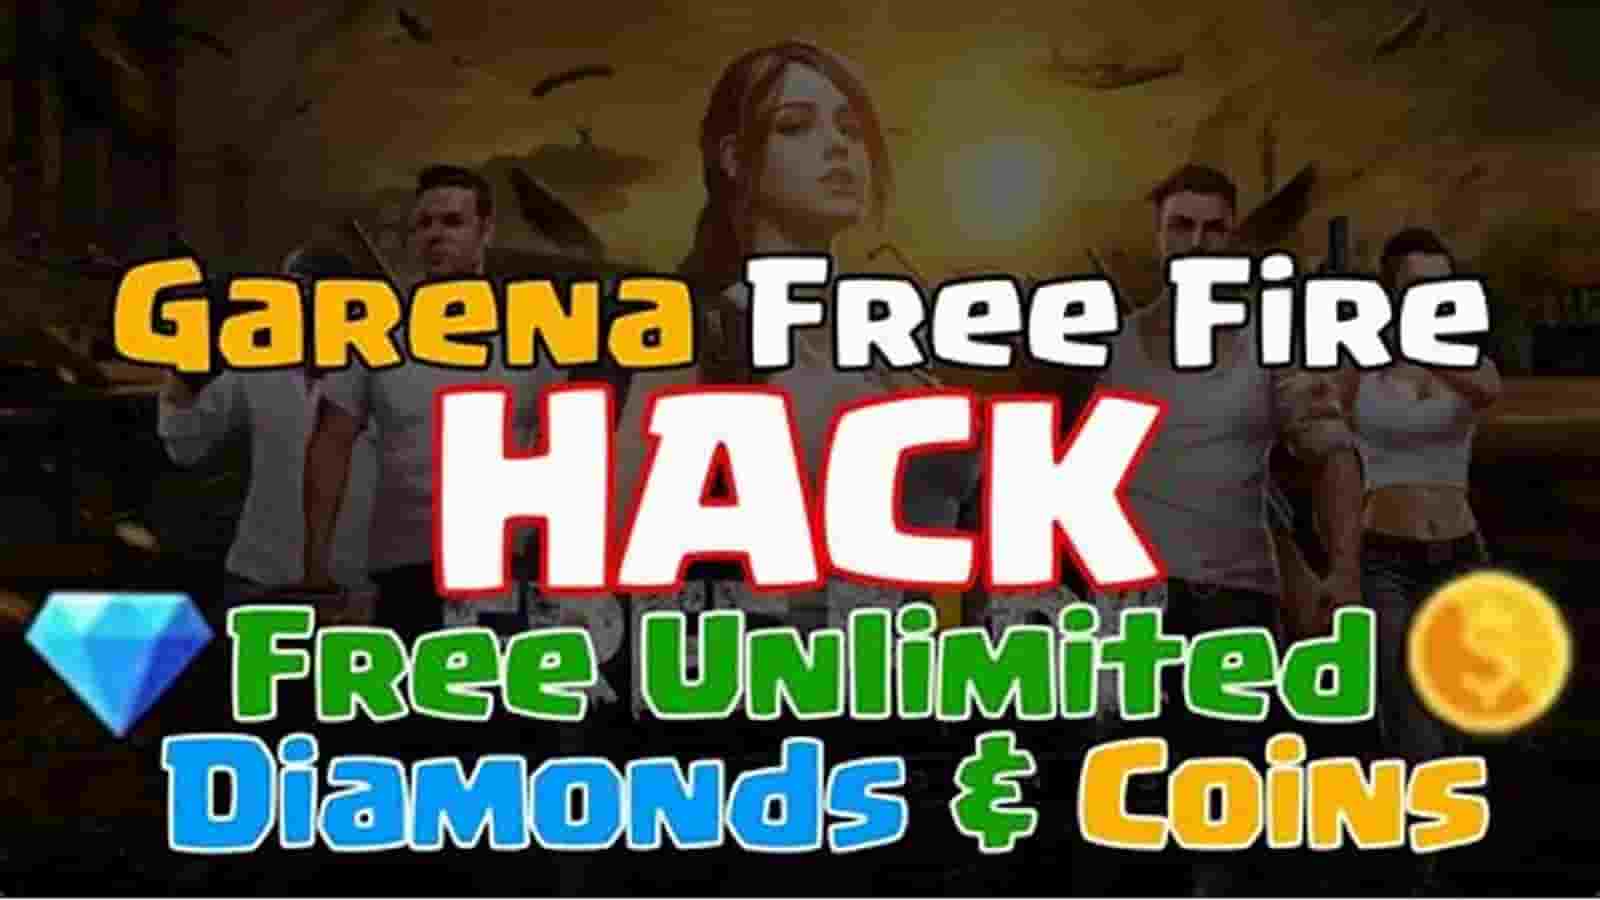 How to hack 25000 diamonds in free fire without human verification